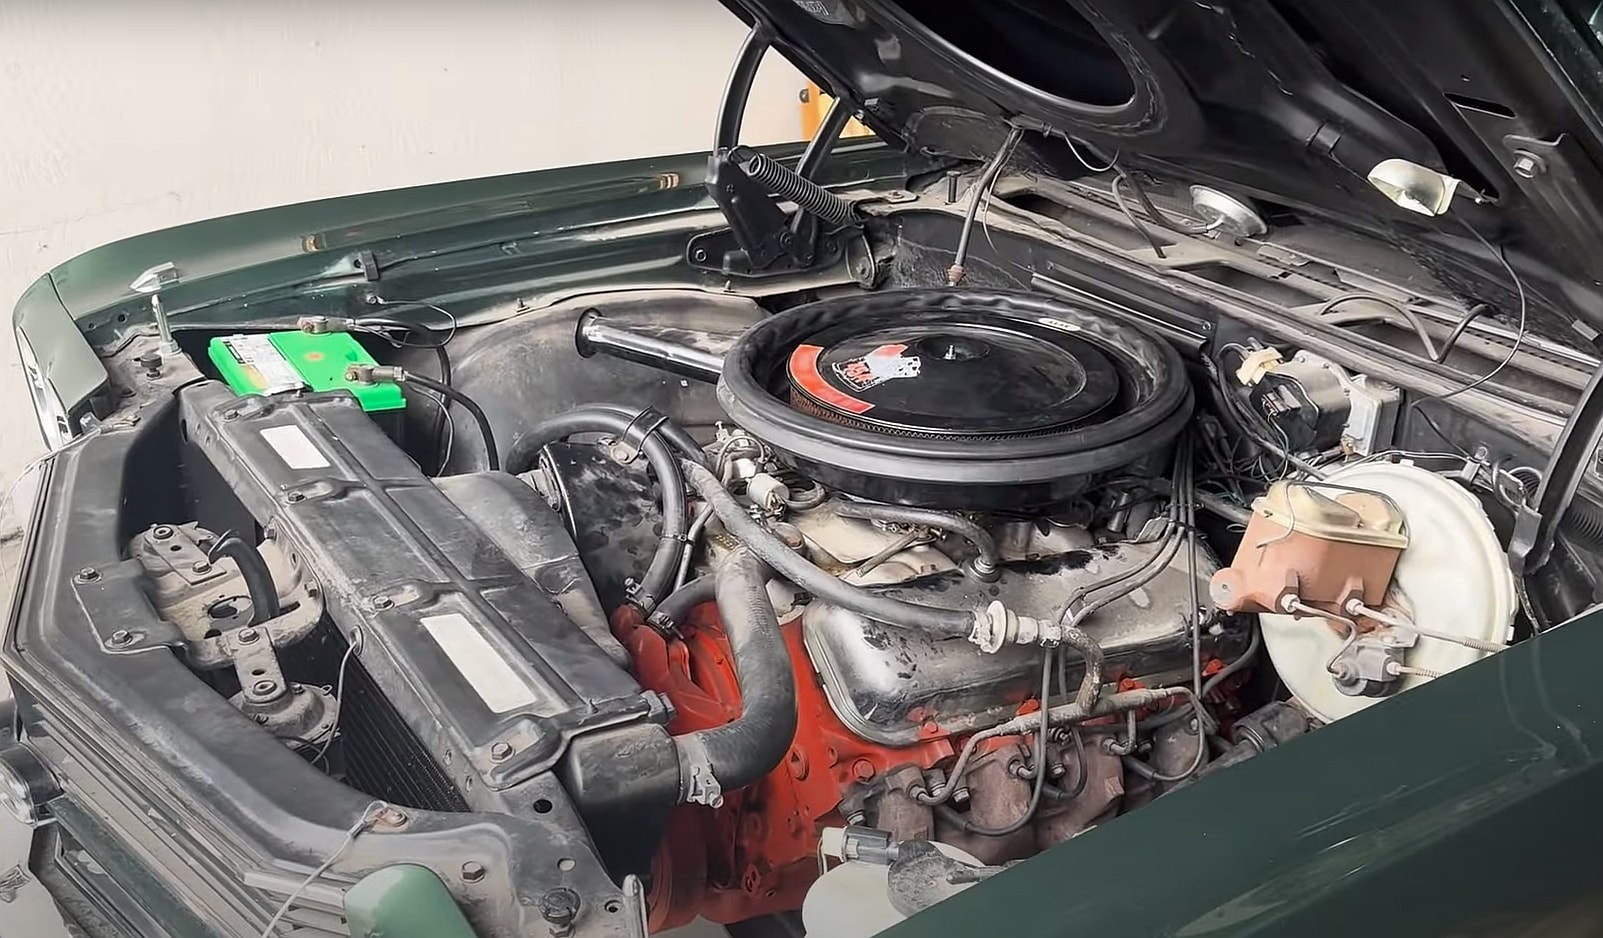 Rare LS6 Chevelle Discovery Sparks